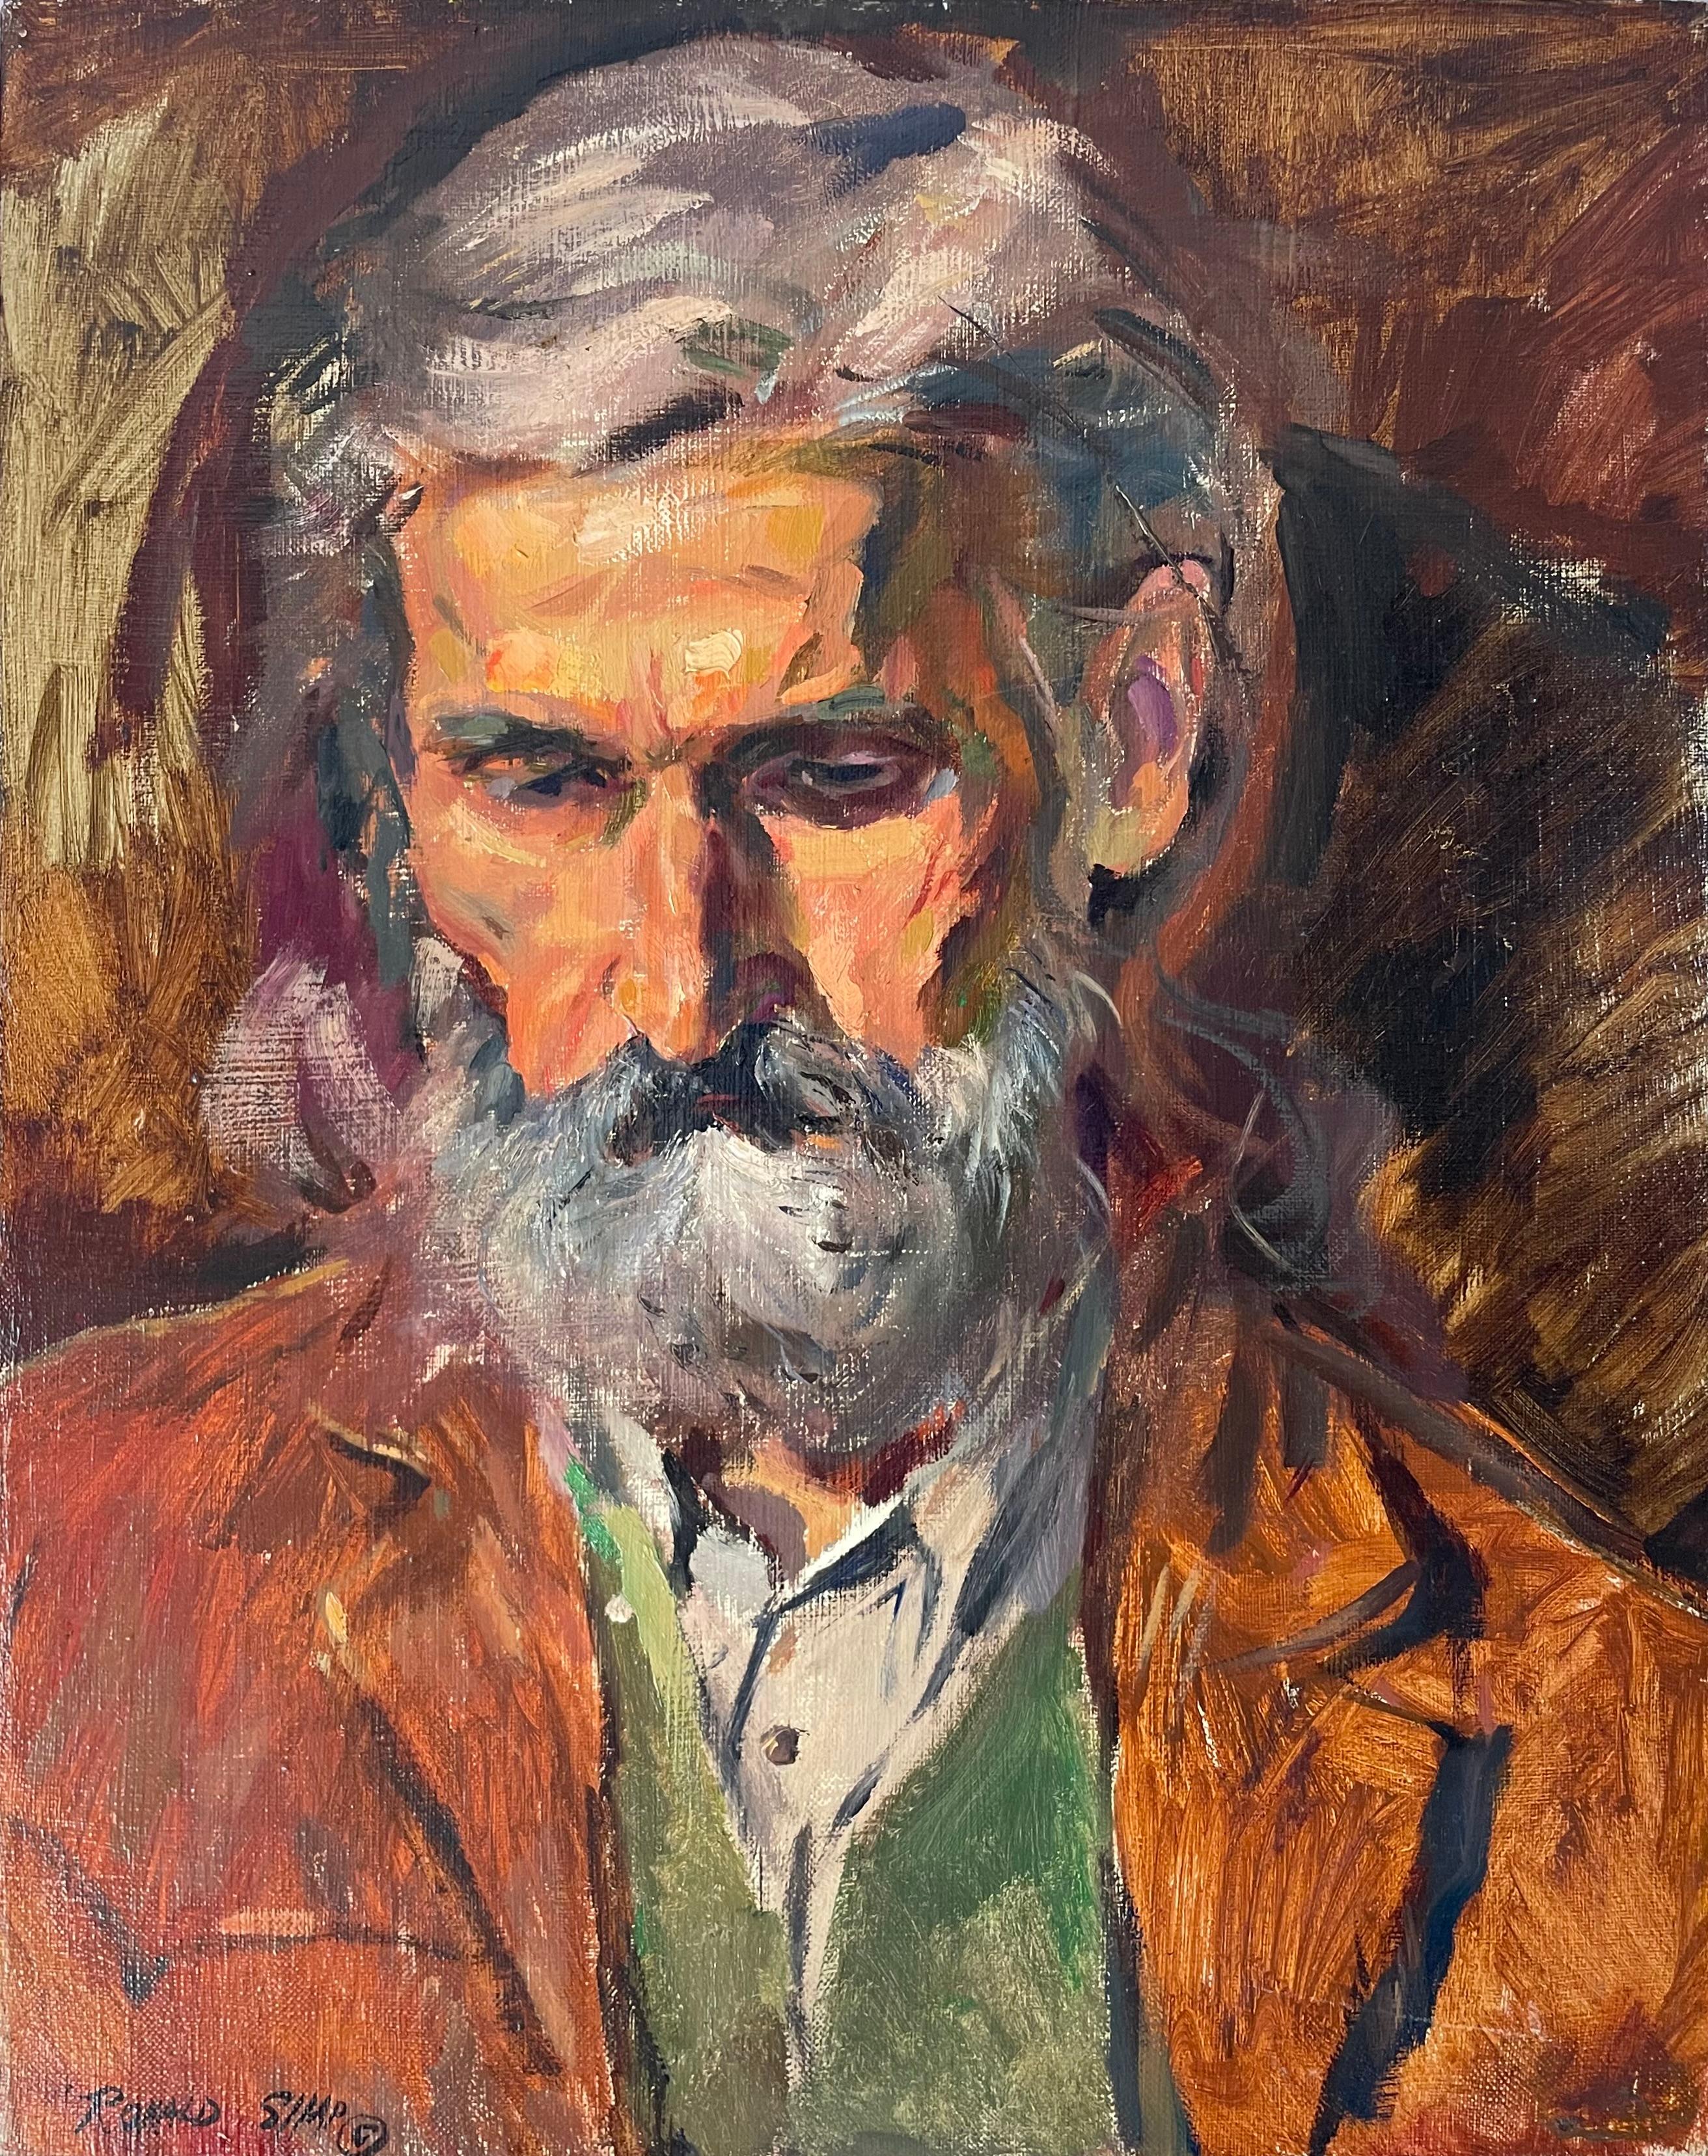 Original oil painting by celebrated, twentieth-century California landscape painter, Ronald Shap. A thoughtful portrait of an older man in orange and gray from the artist's early impressionist period. 20x16 inch canvas. Signed. 

Ronald Shap was